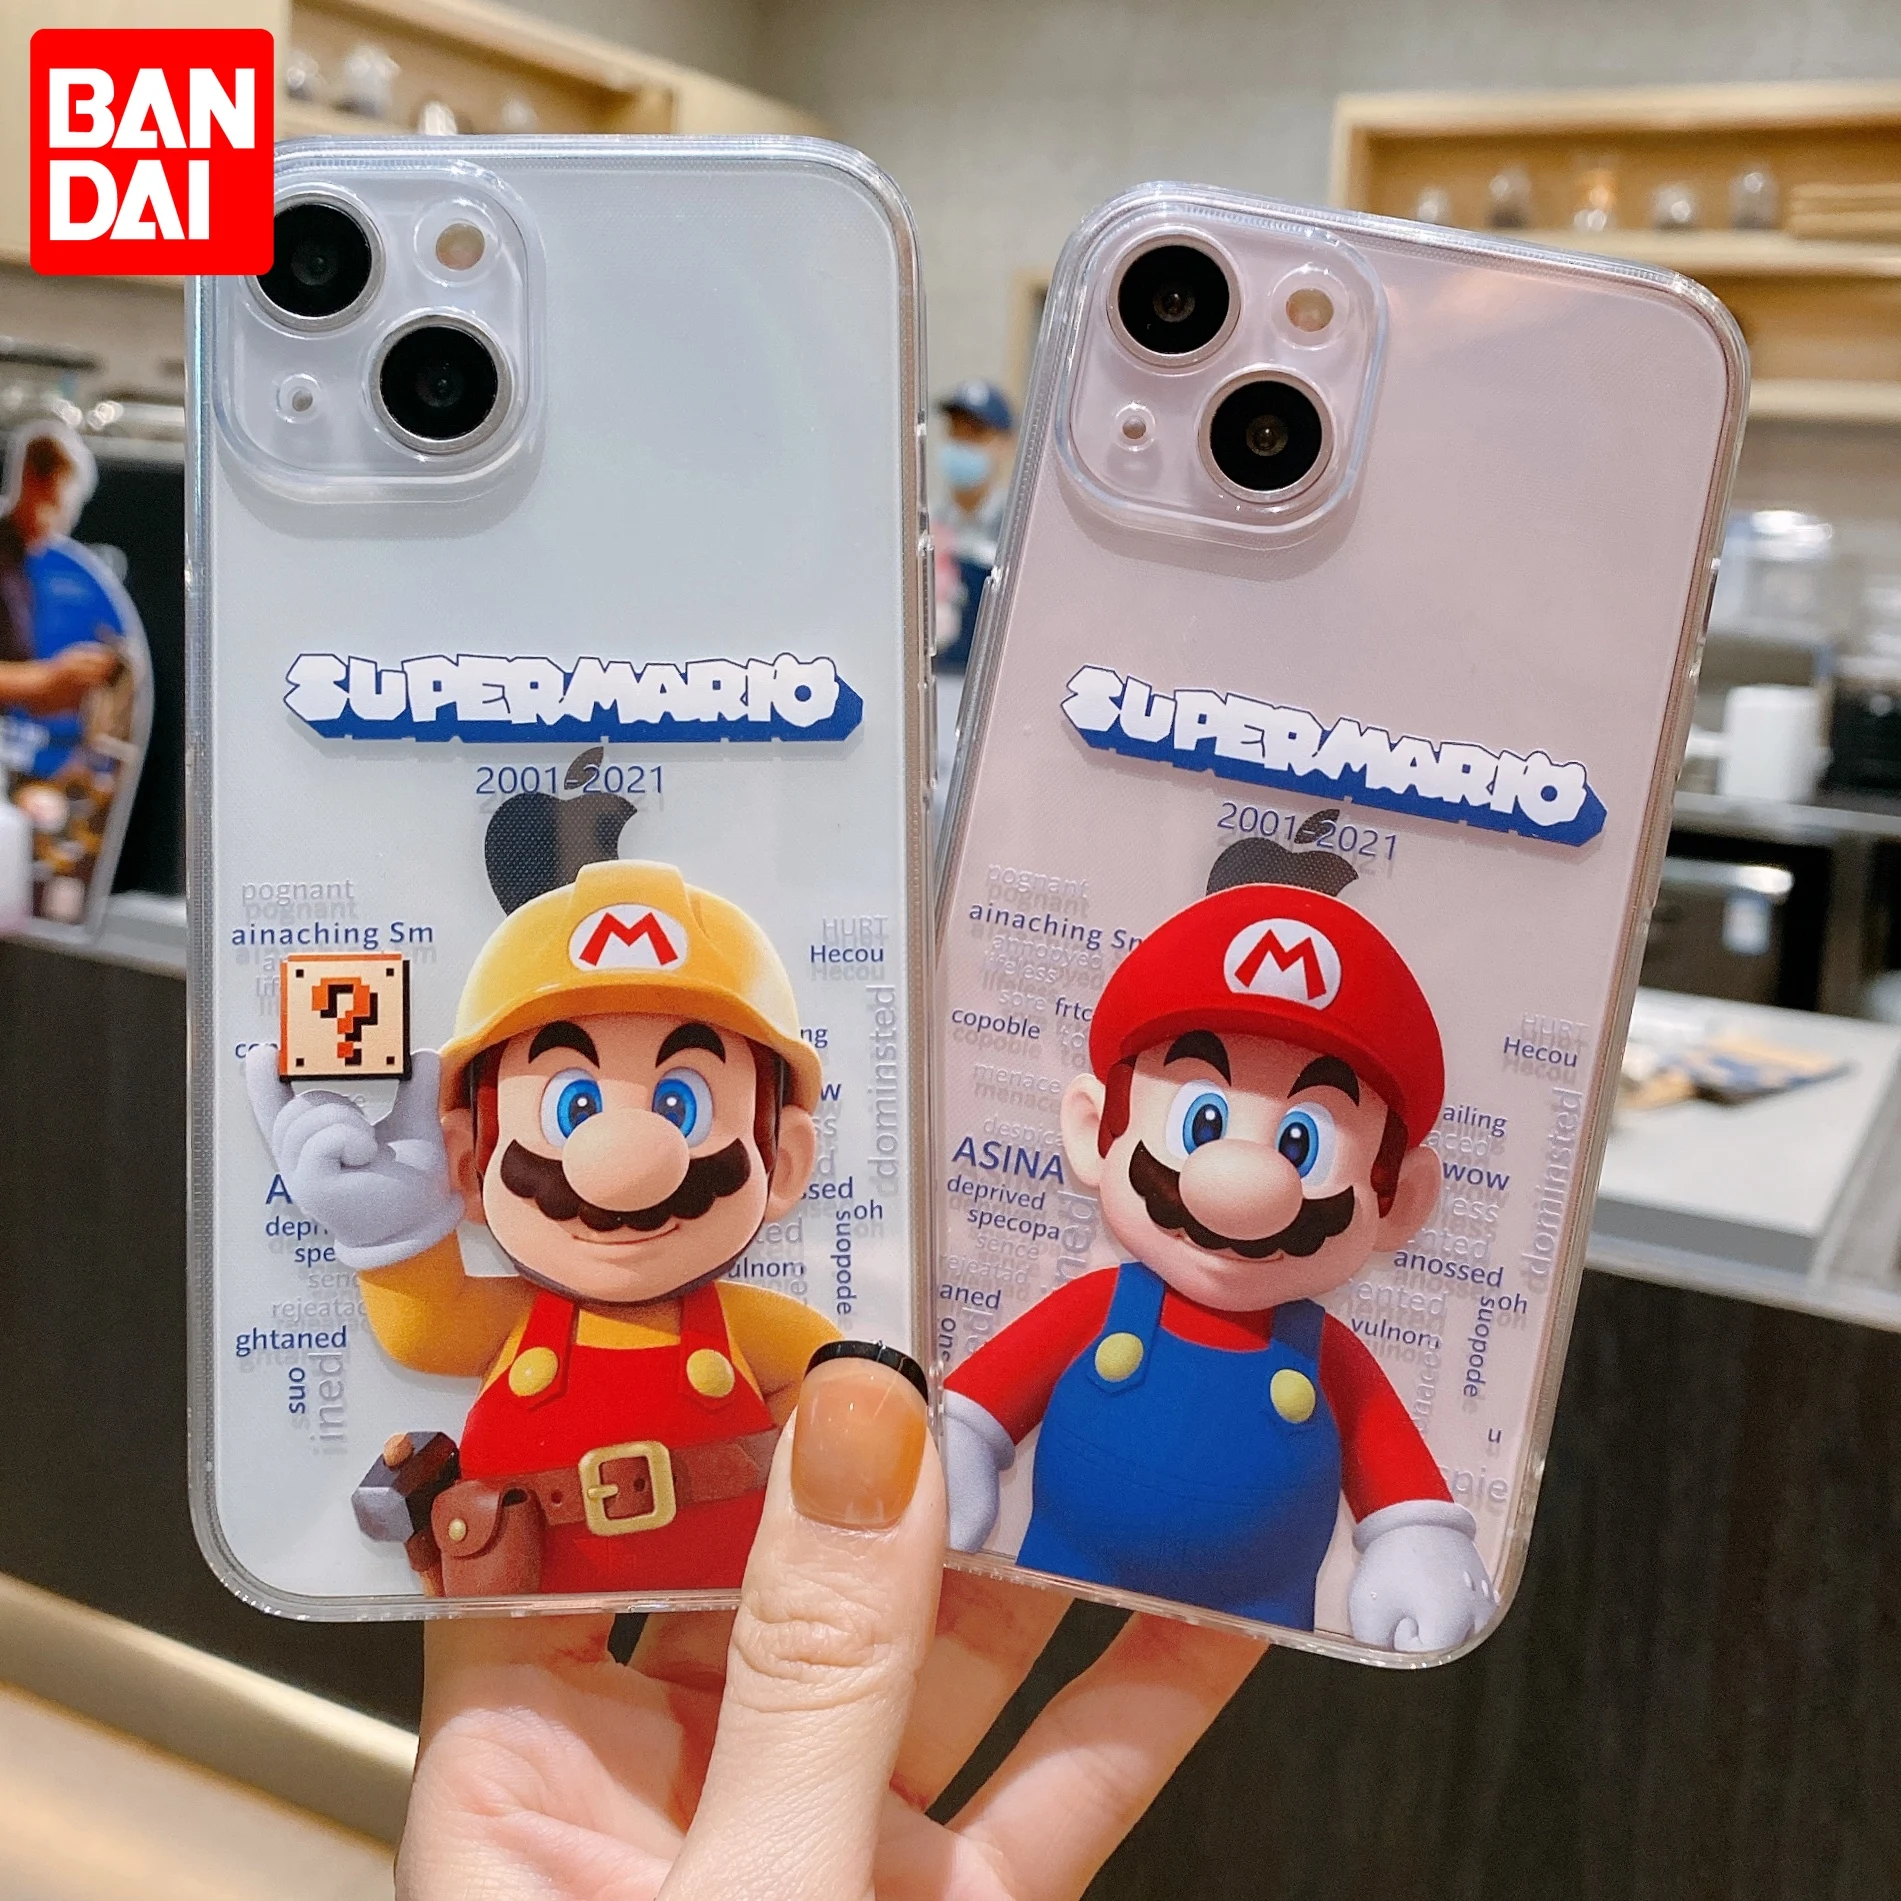 

Bandai Cute Super Mario Couple Clear Silicon Mobile Phone Case For iPhone XR Xs Max 8 Plus 11 12 13 Pro Max Case